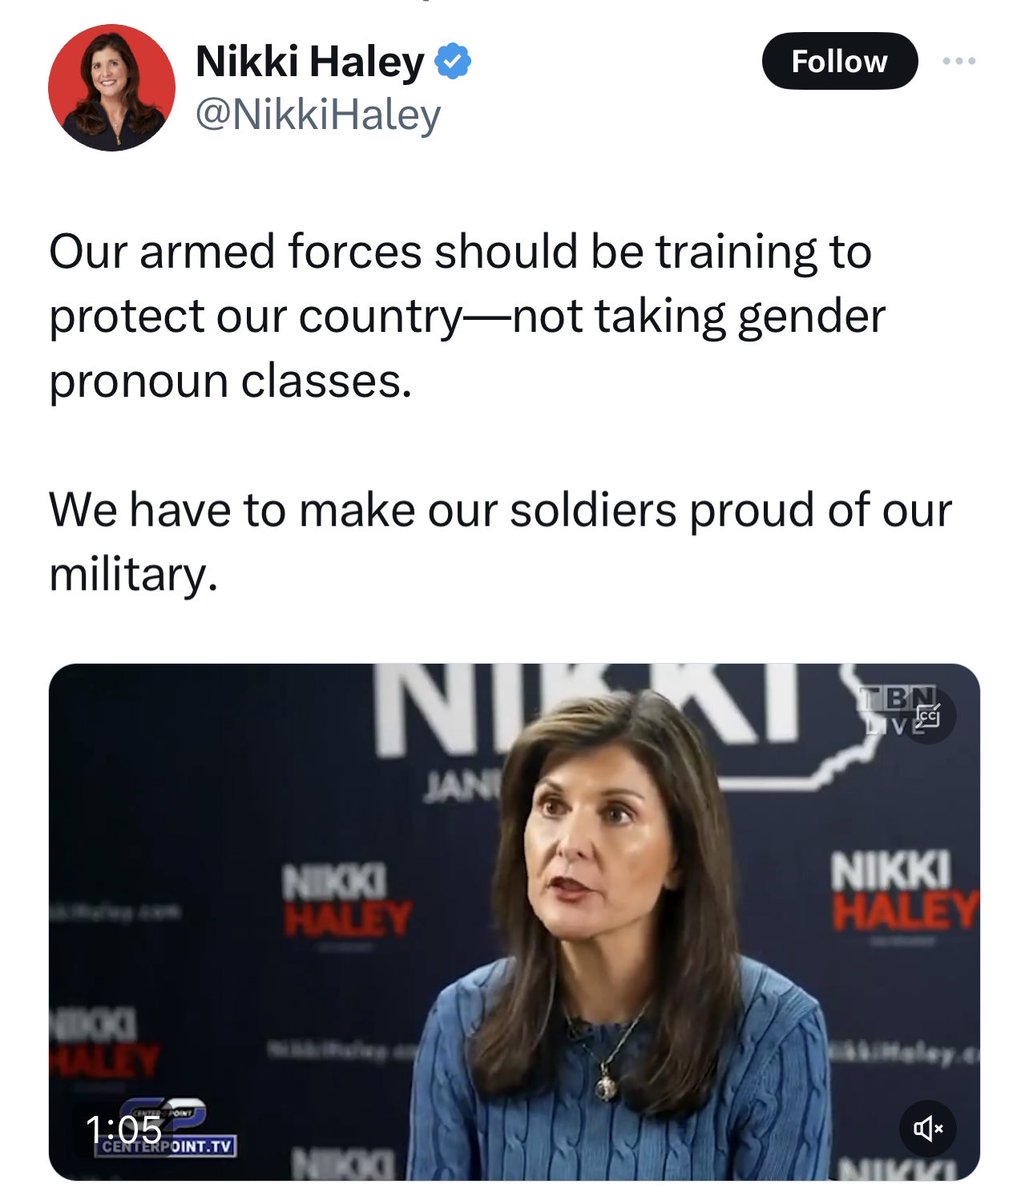 Is Nikki Haley suggesting that members of the United States military shouldn’t be proud of their service right now?